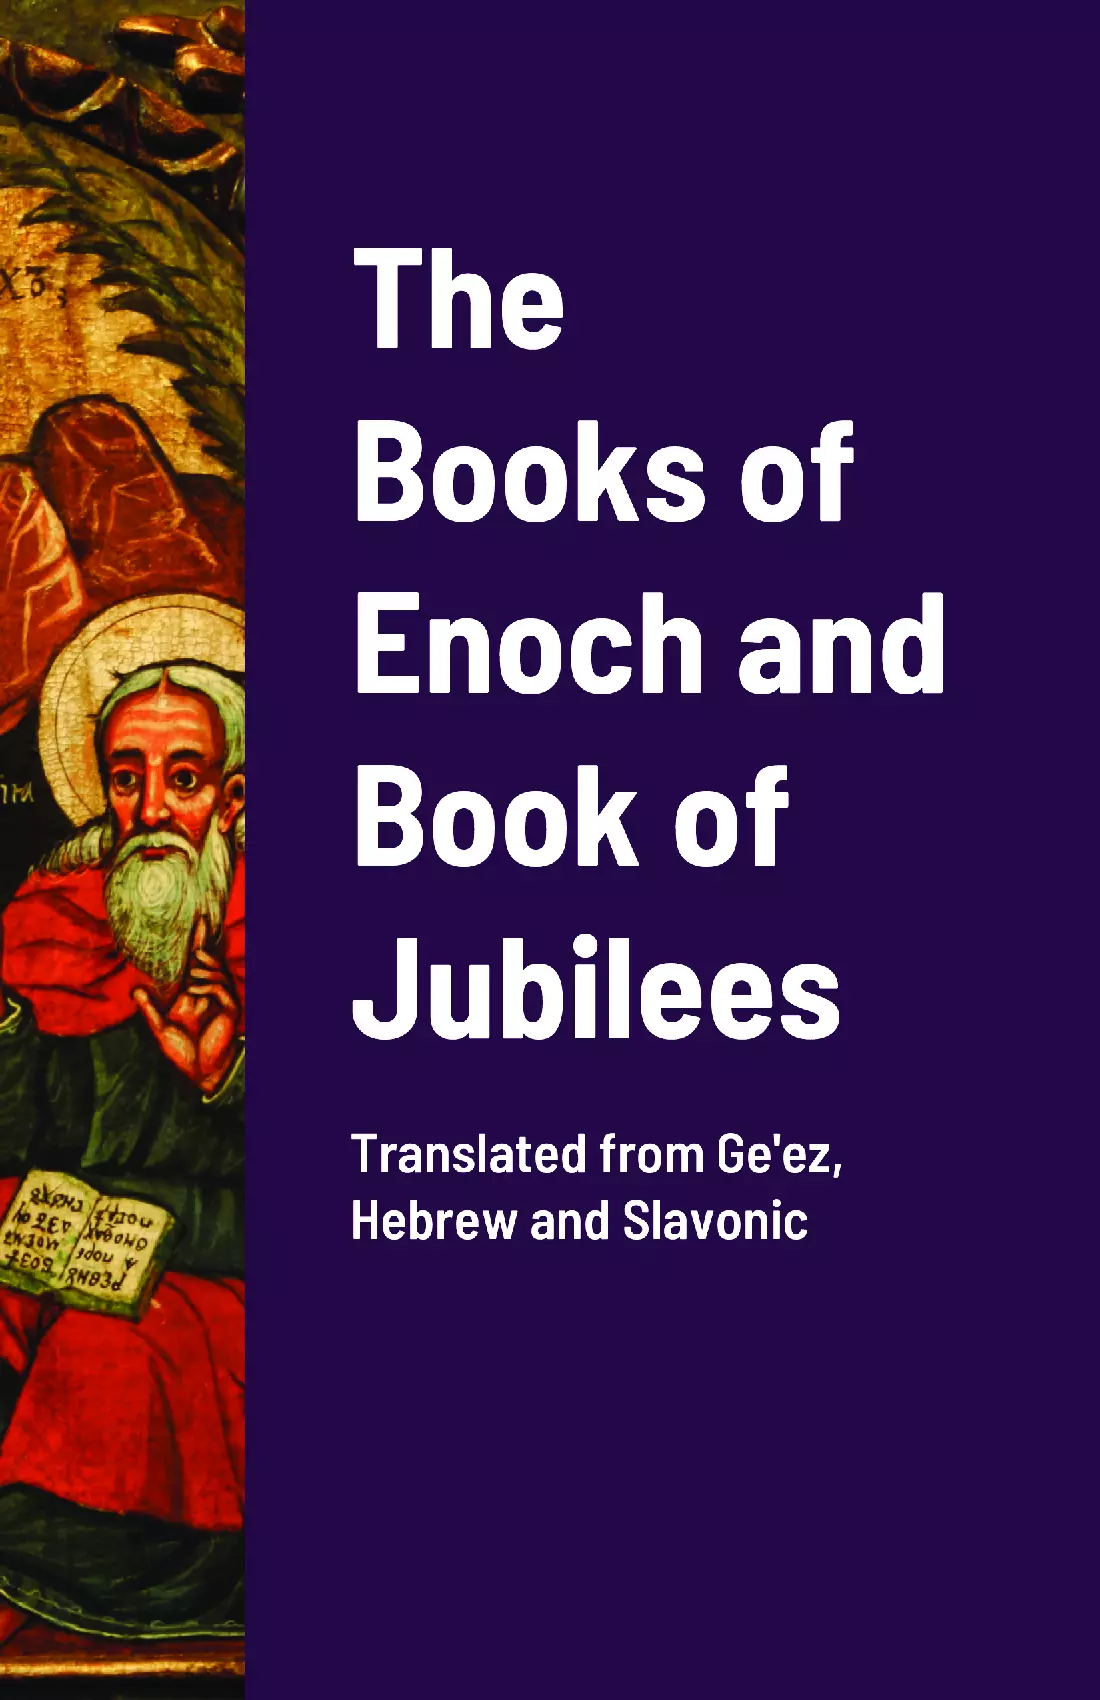 The Books of Enoch and the Book of Jubilees